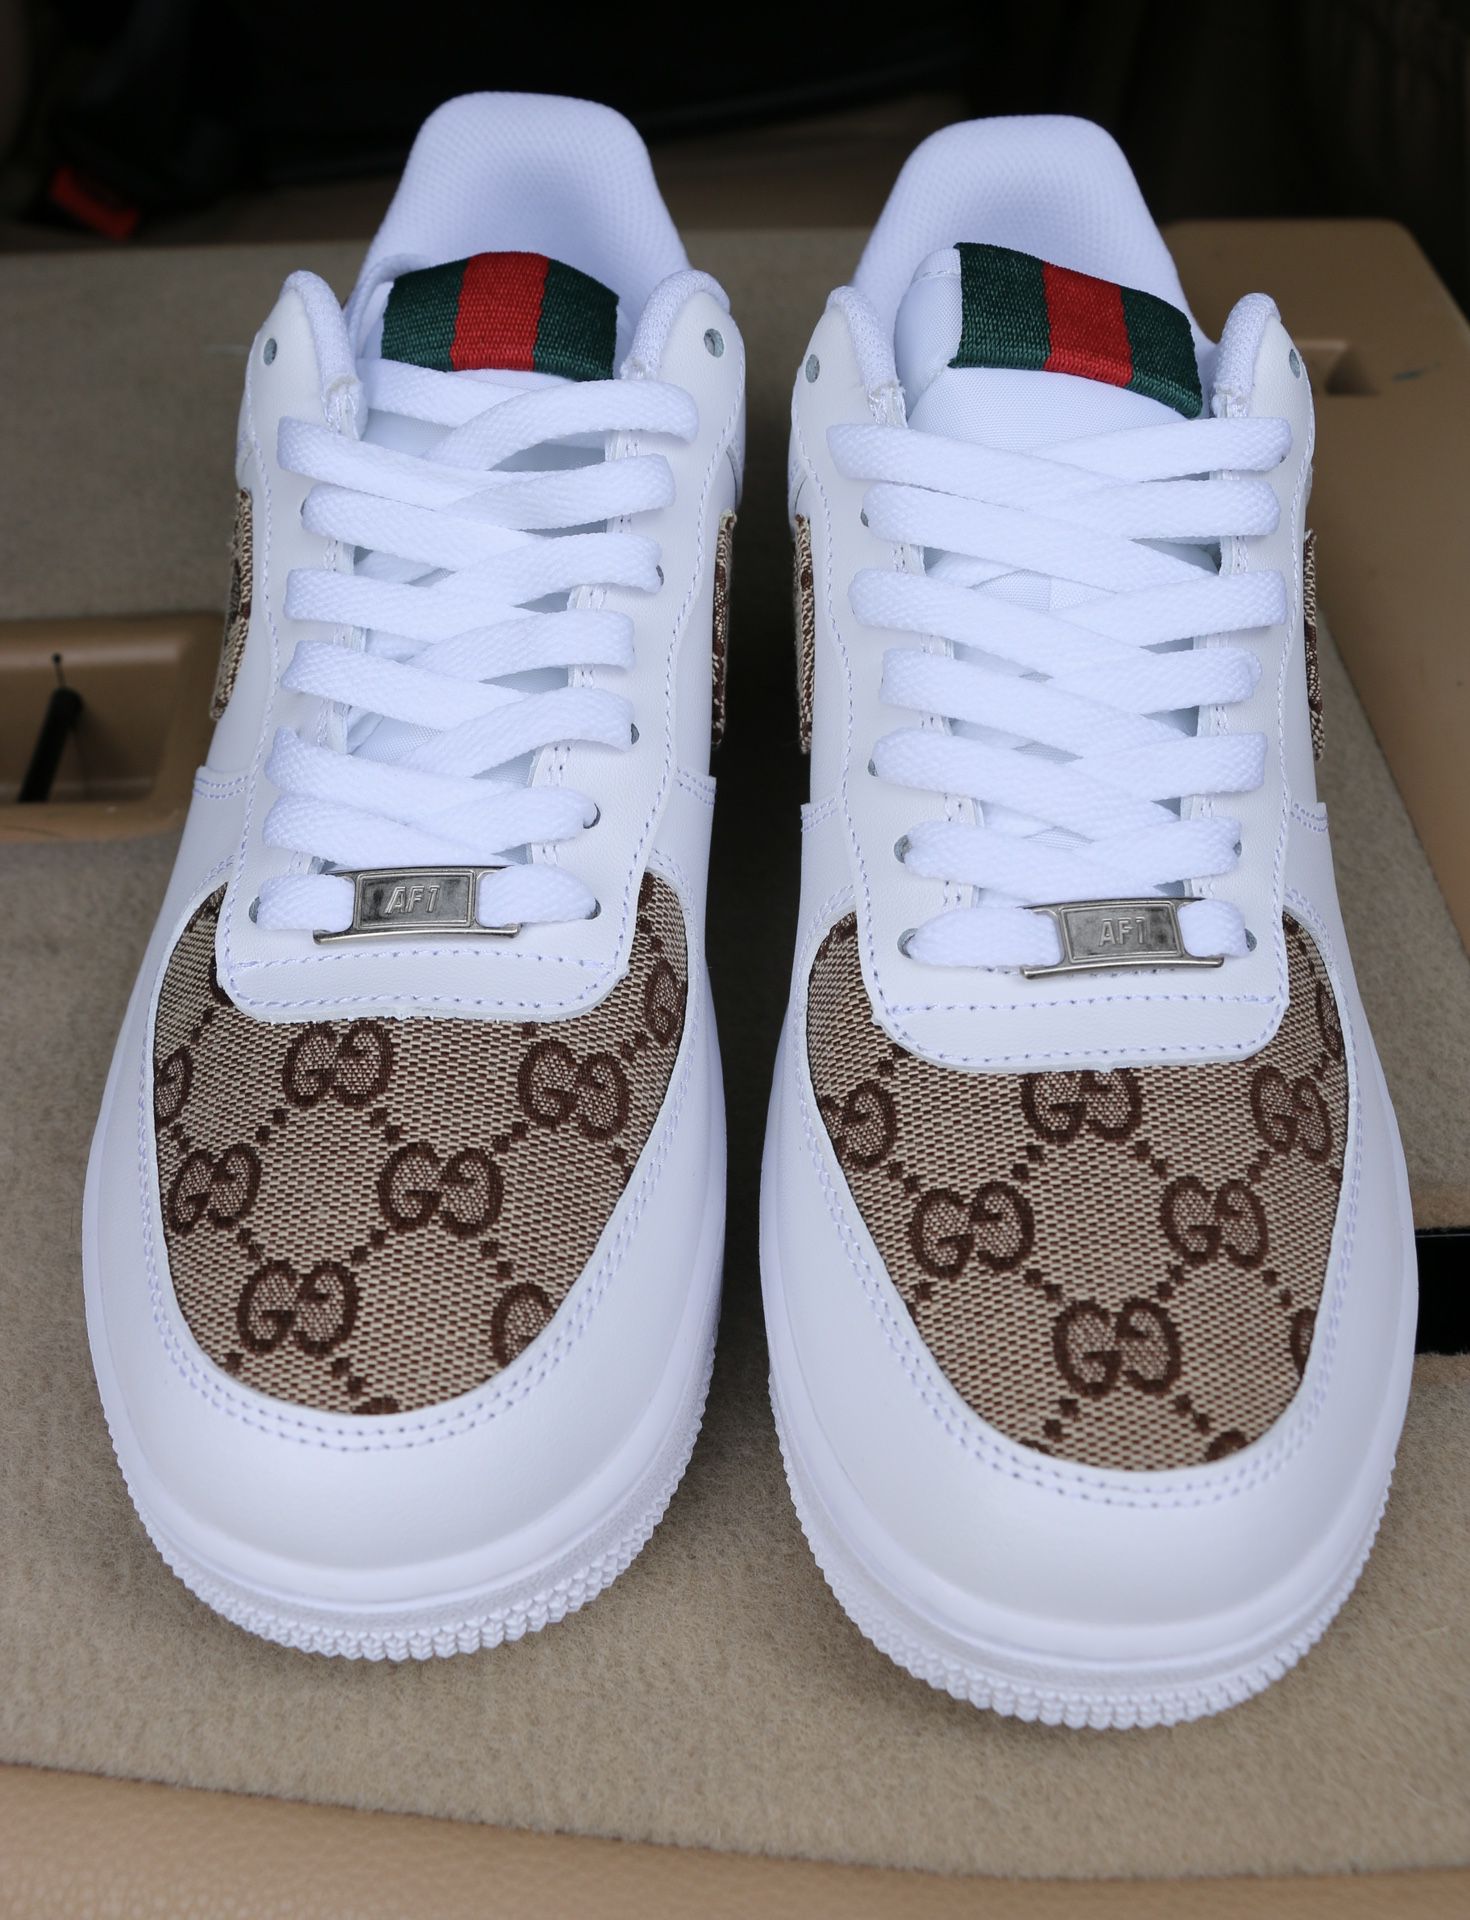 nike gucci shoes air force 1